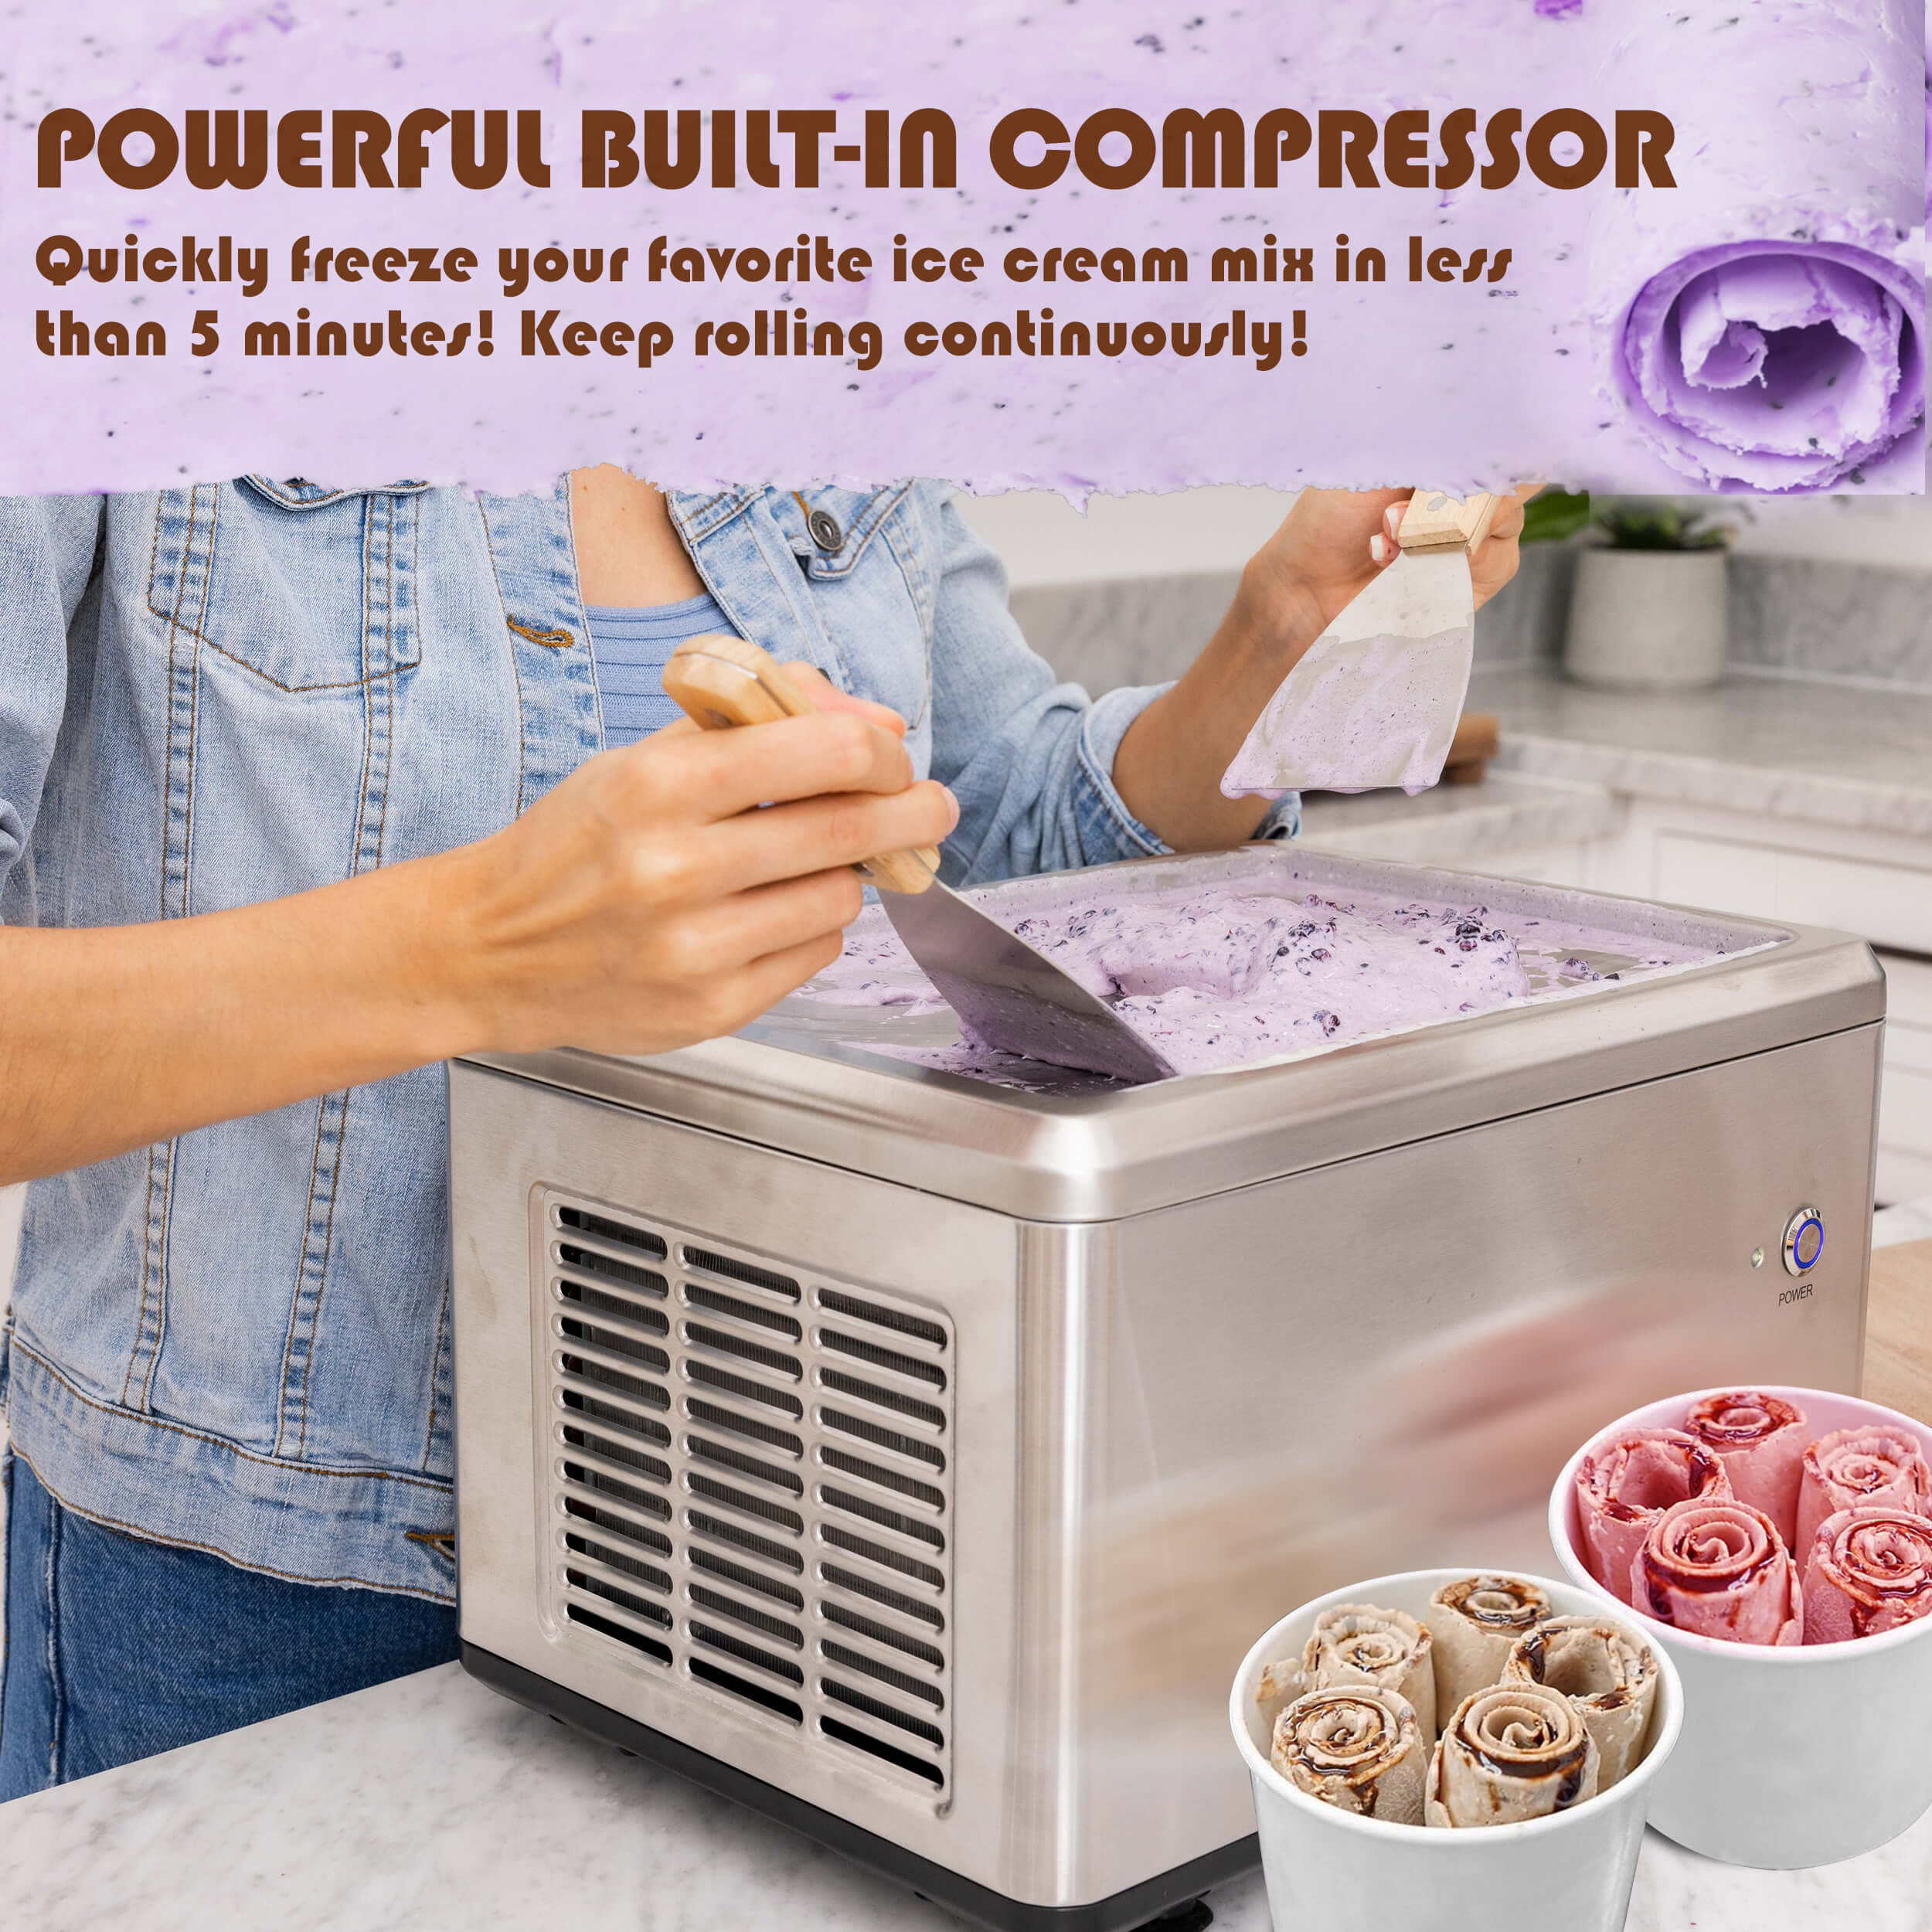 Whynter ICR-300SS Portable Instant Ice Cream Maker Frozen Pan Roller in Stainless Steel